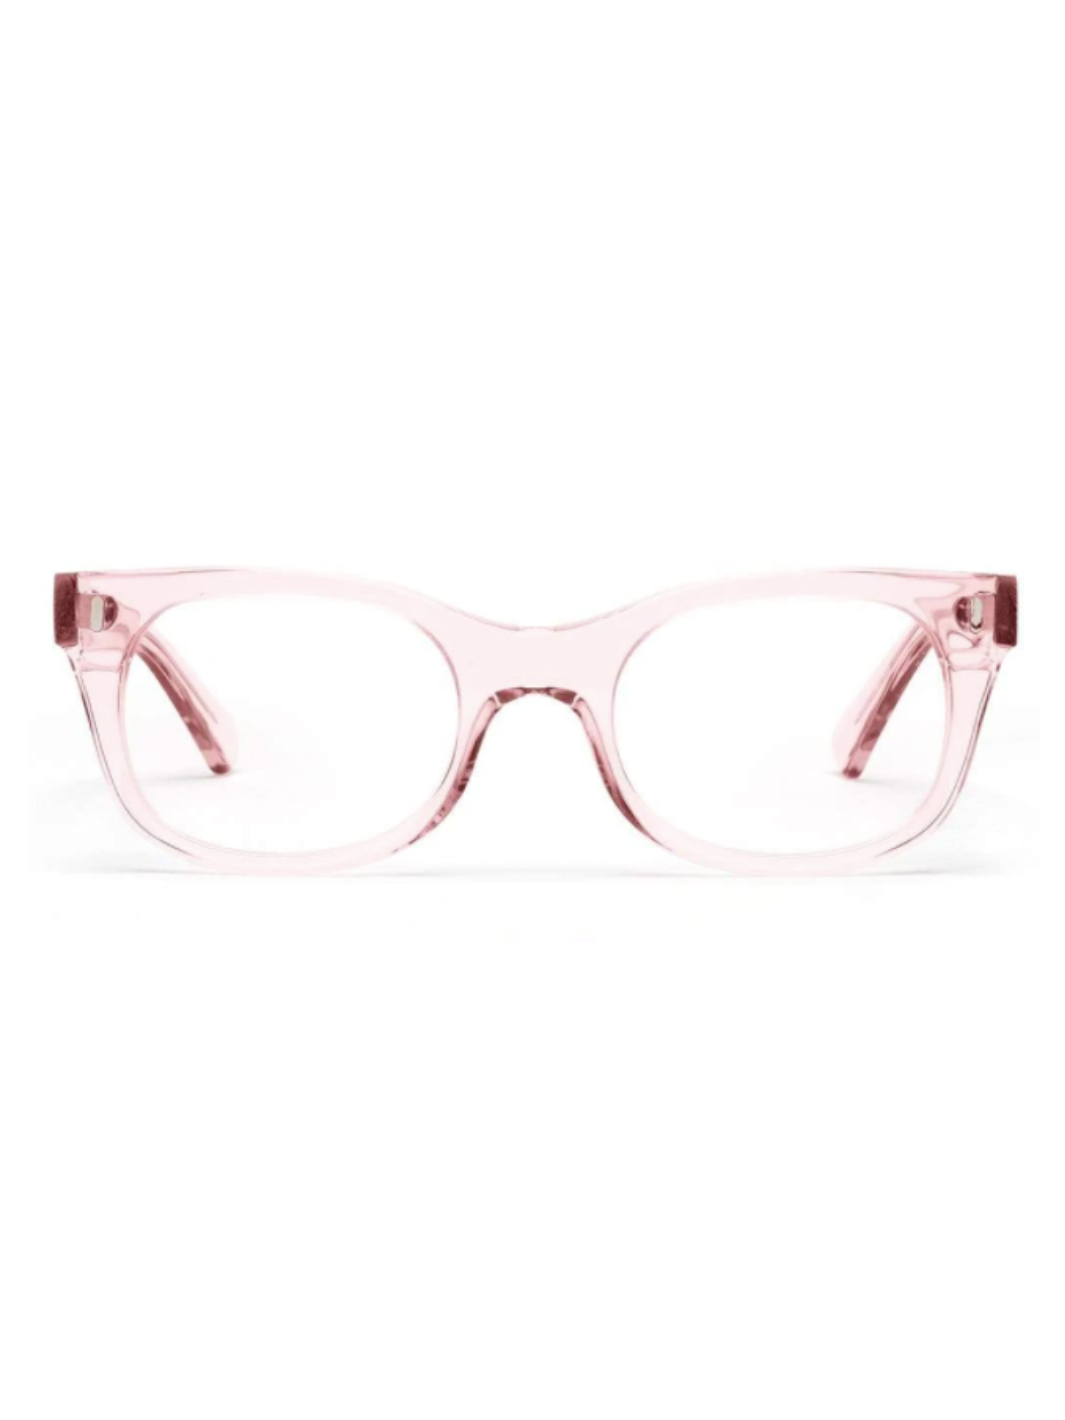 BIXBY GLASSES IN POLISHED CLEAR PINK - Romi Boutique